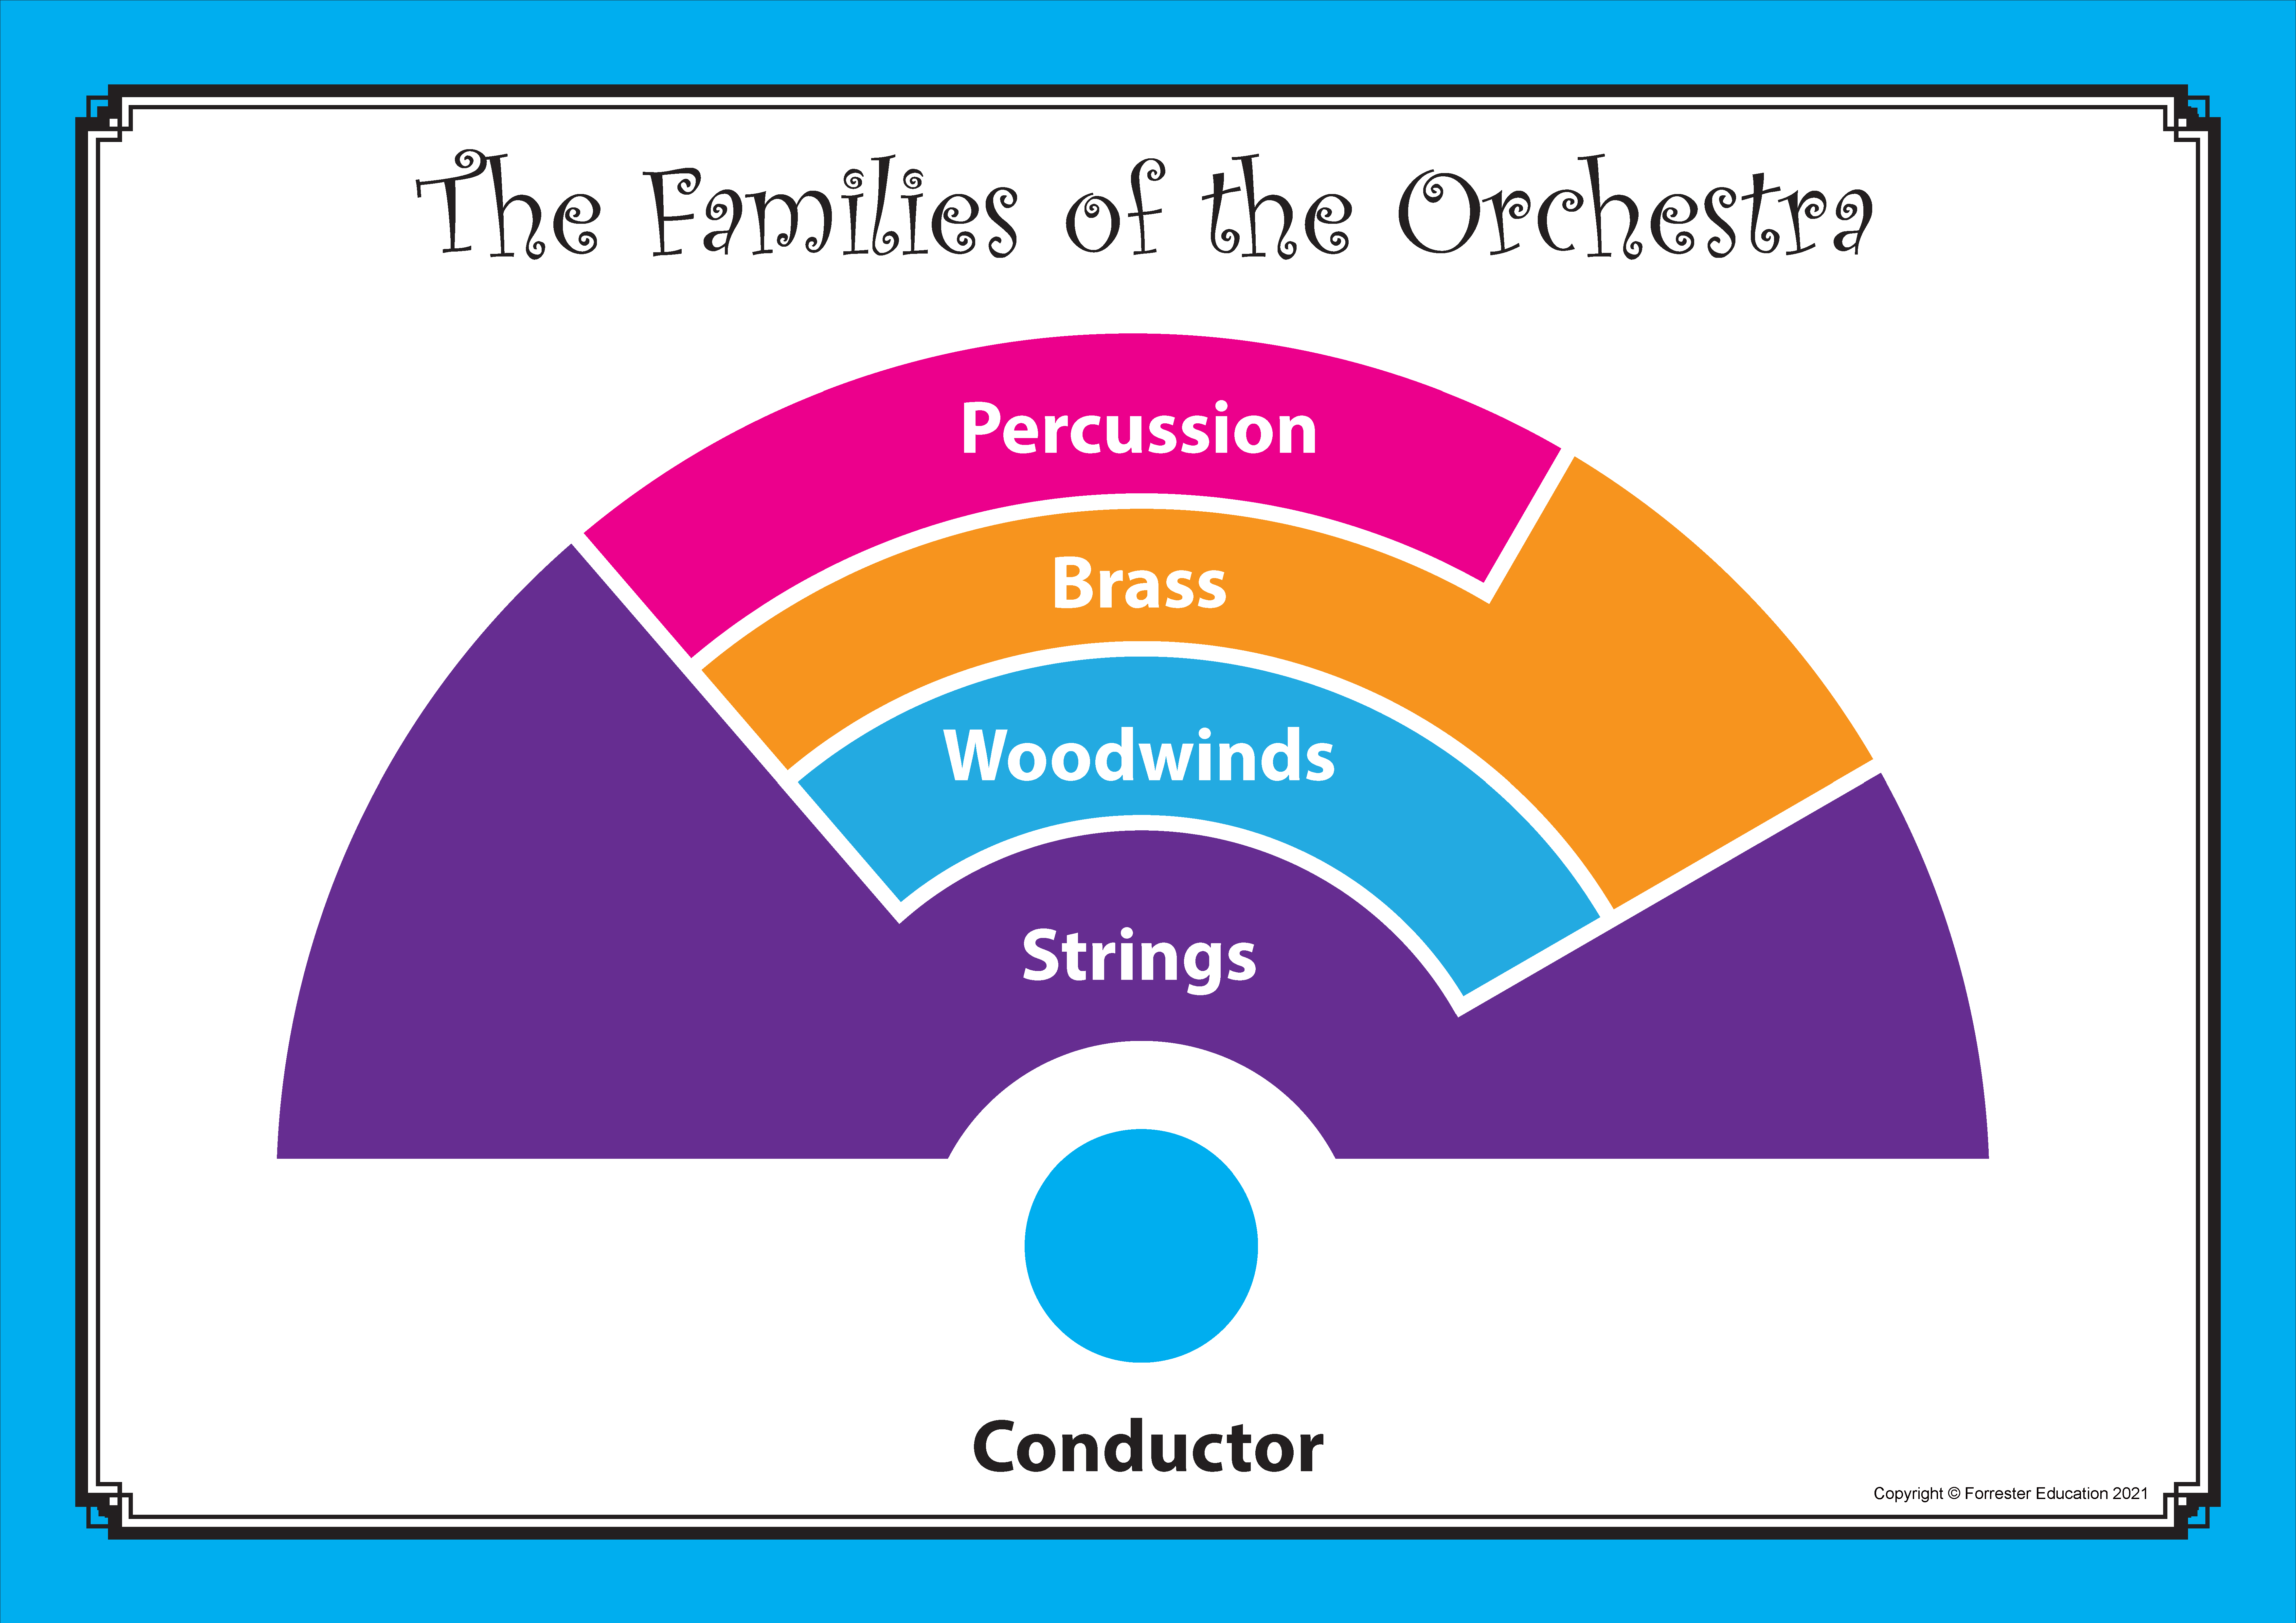 The Layout of the Orchestra